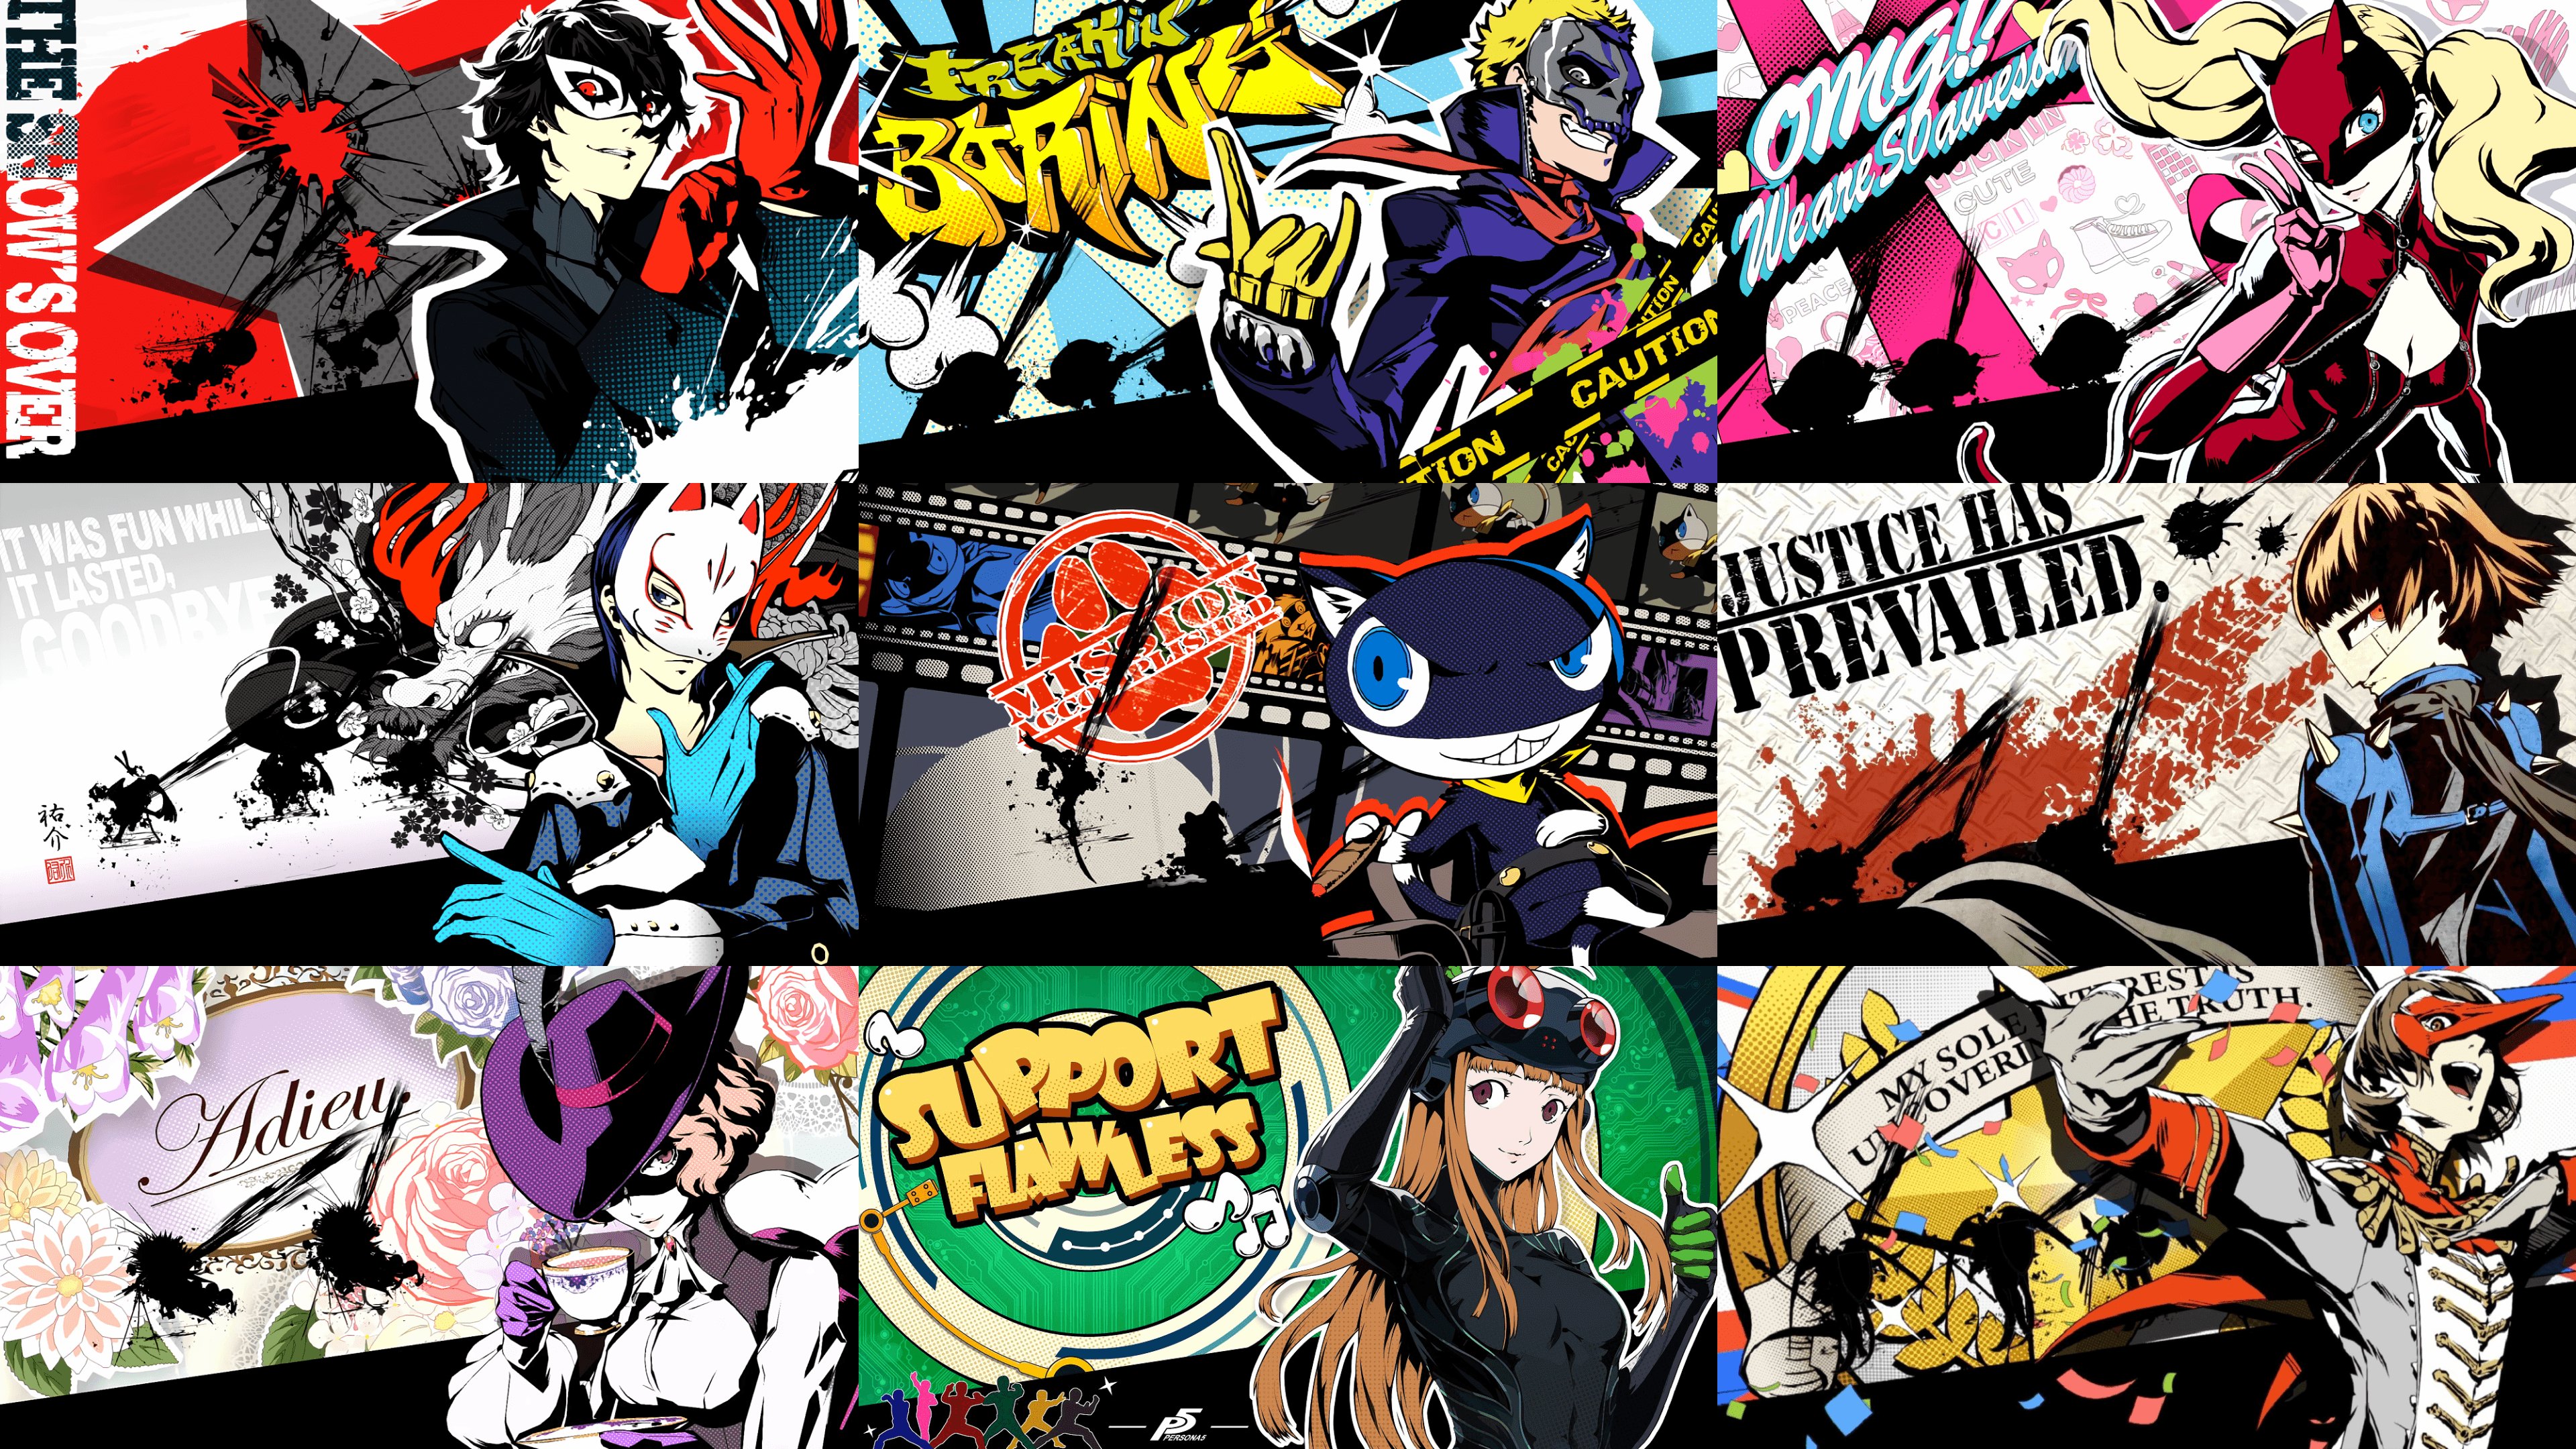 Persona 5 4k Wallpapers Top Free Persona 5 4k Backgrounds